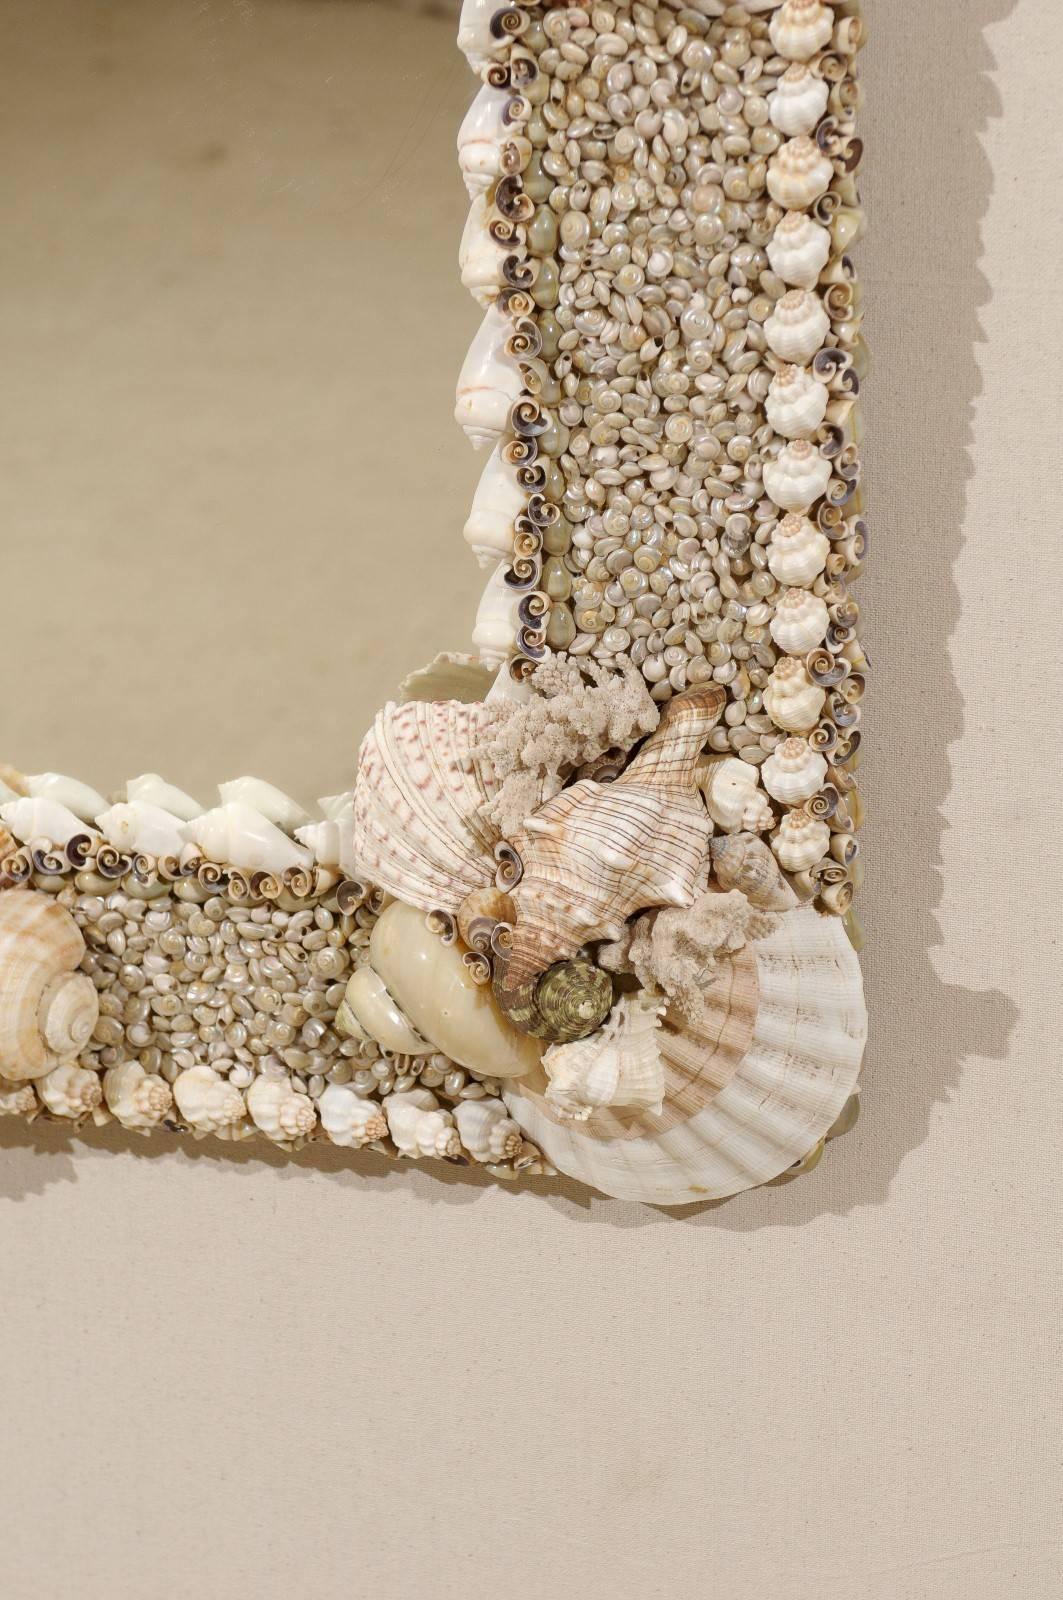 Philippine Real Seashell and Coral Oceanic Wall Mirror with Shells from the Indian Ocean